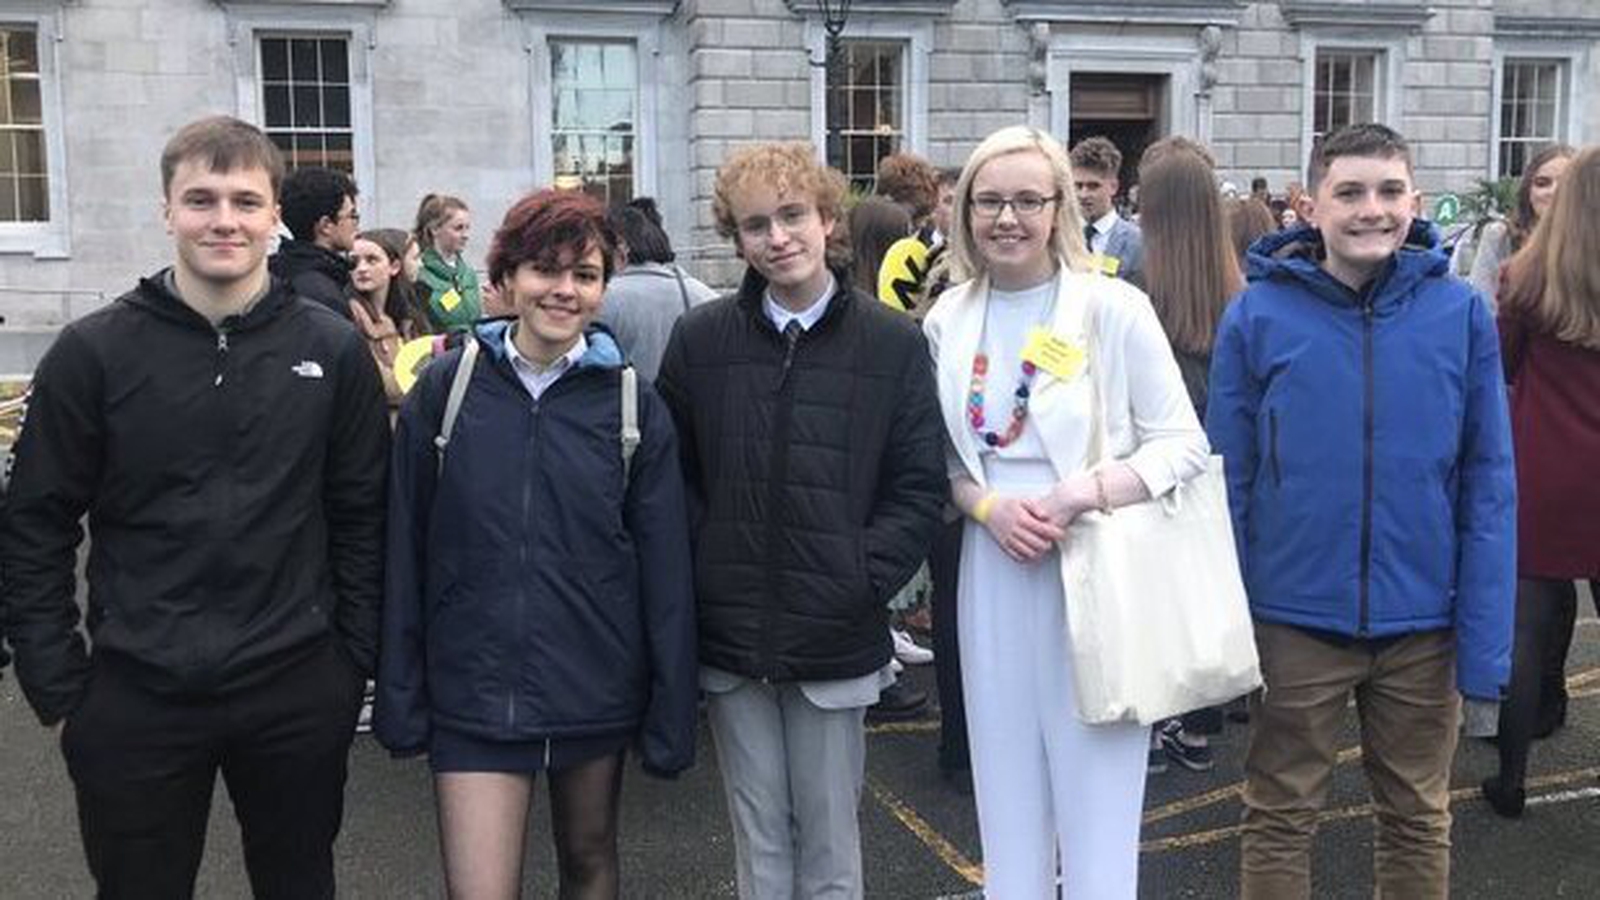 Youth Assembly on climate change to take place in Dáil - RTE.ie